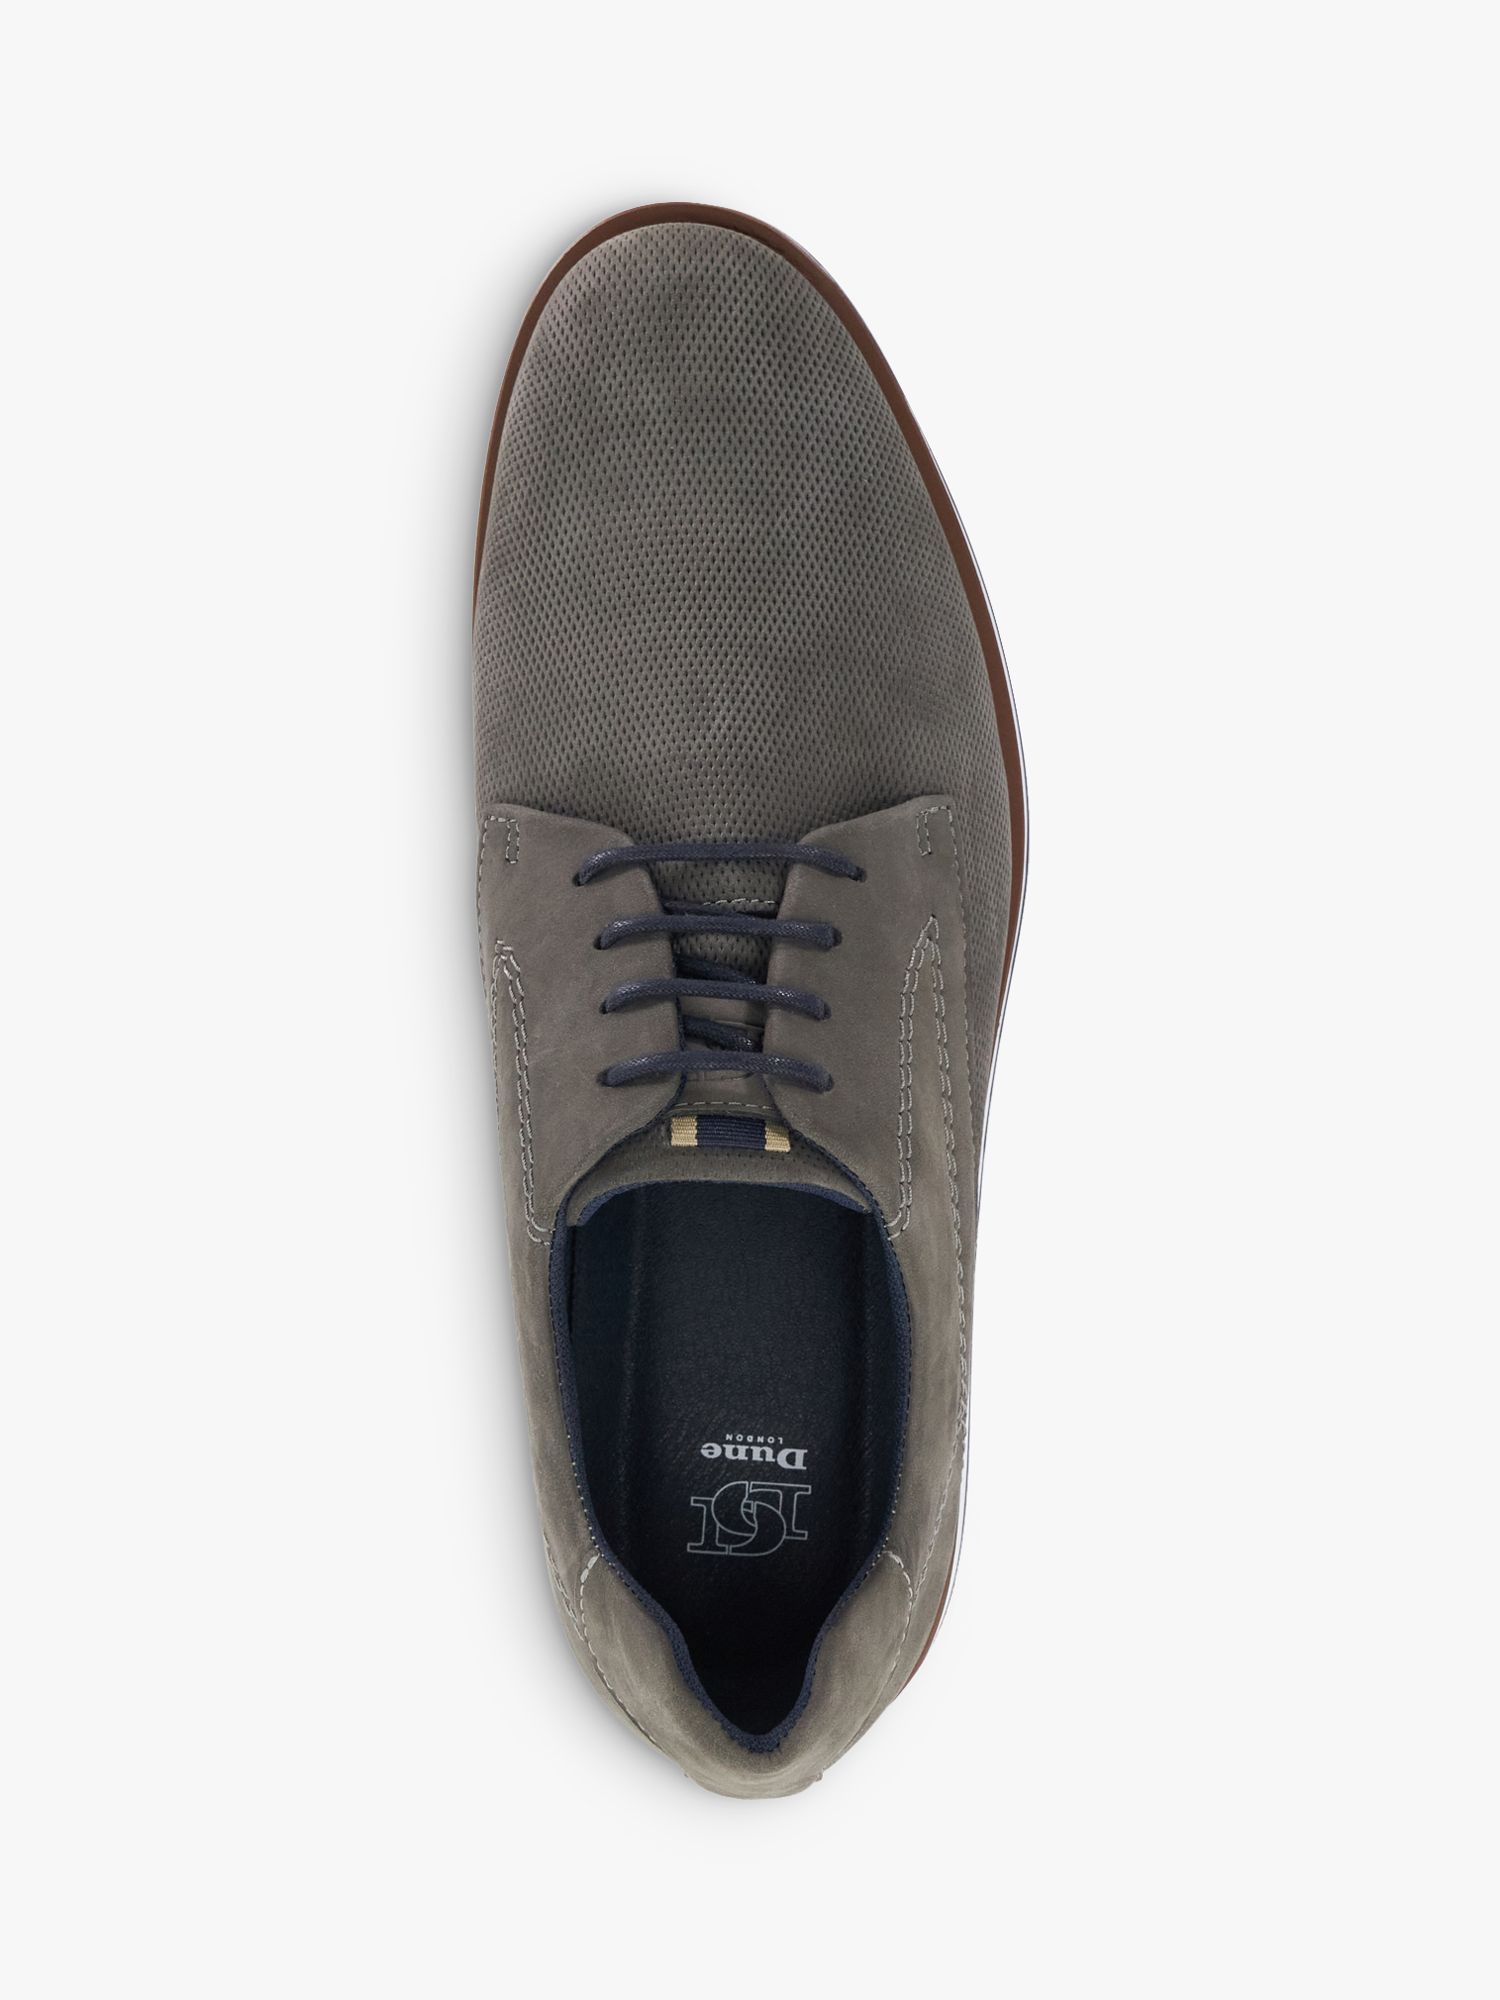 Buy Dune Wide Fit Beko Perforated Nubuck Gibson Shoes, Grey Online at johnlewis.com